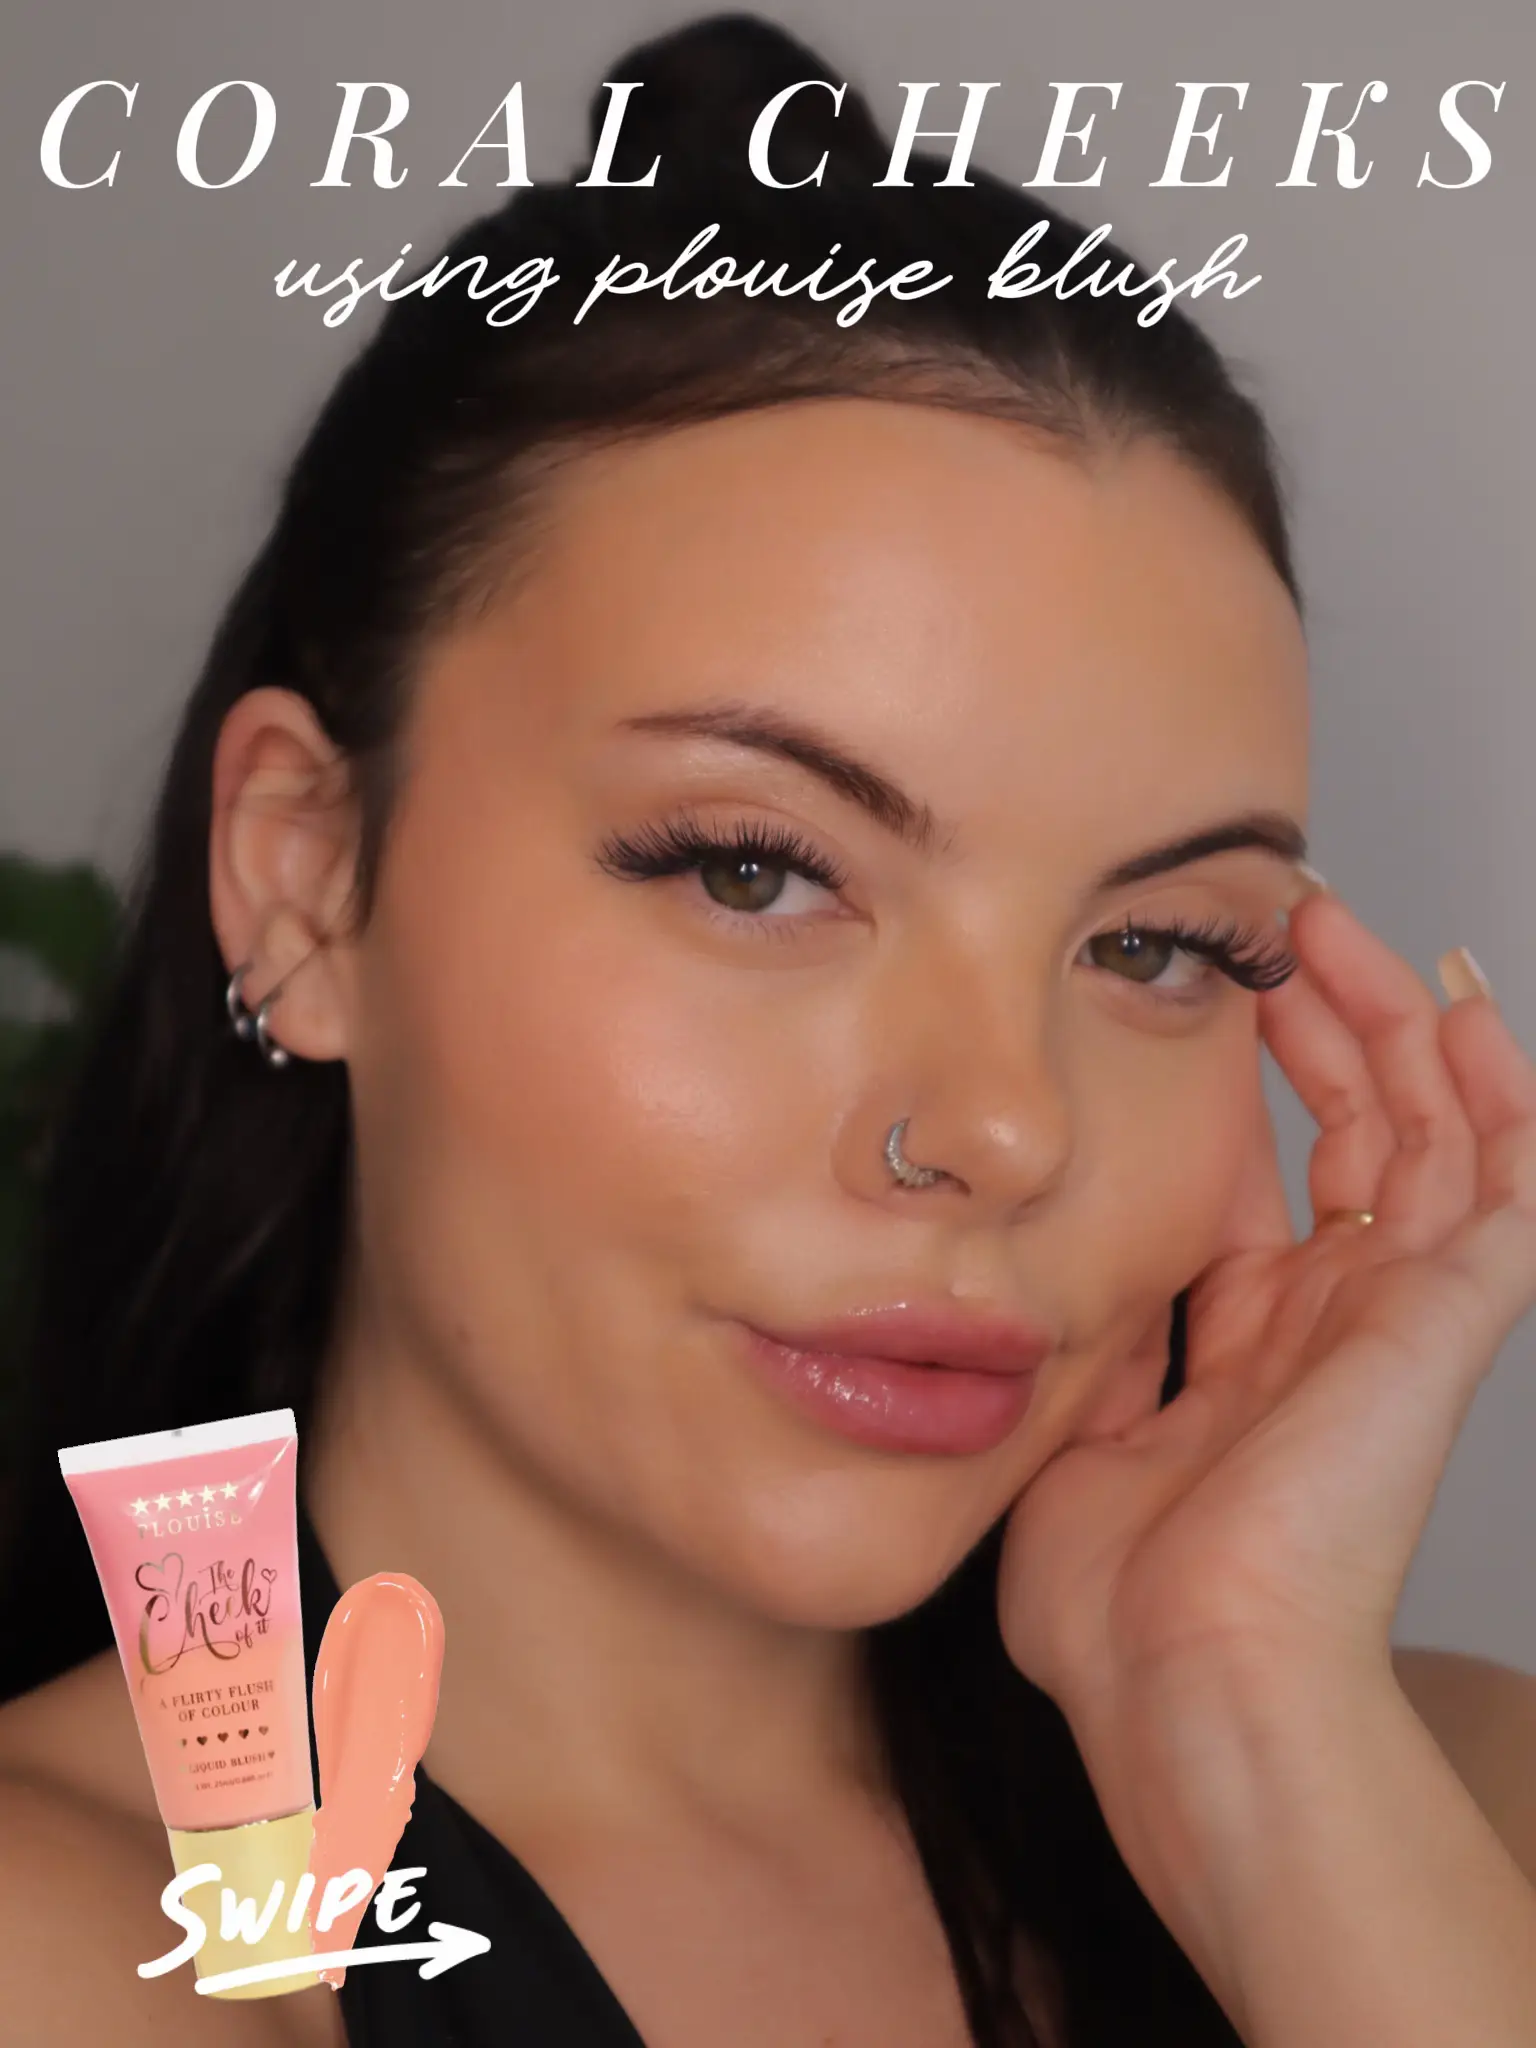 PLOUISE THE CHEEK OF IT LIQUID BLUSH REVIEW+SWATCHES!! 